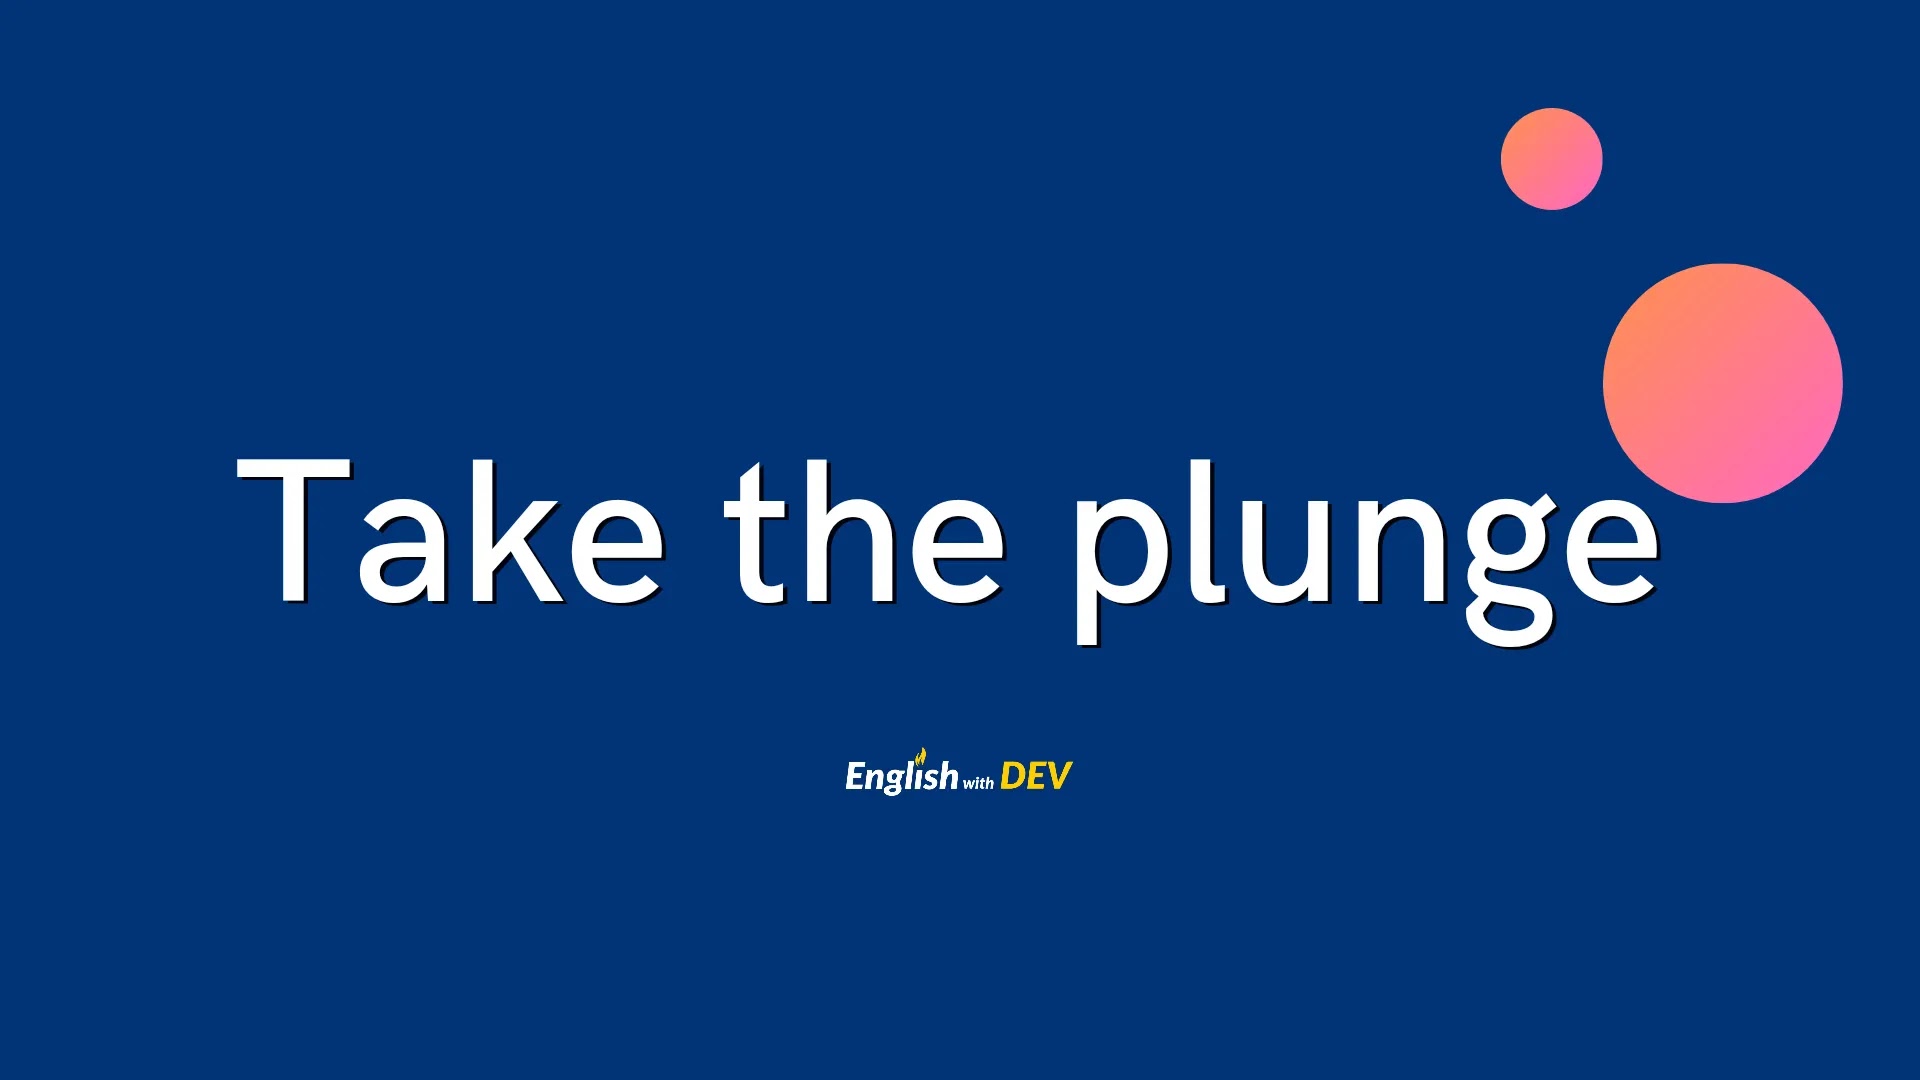 Take the plunge idiom meaning - Dictionary Dev